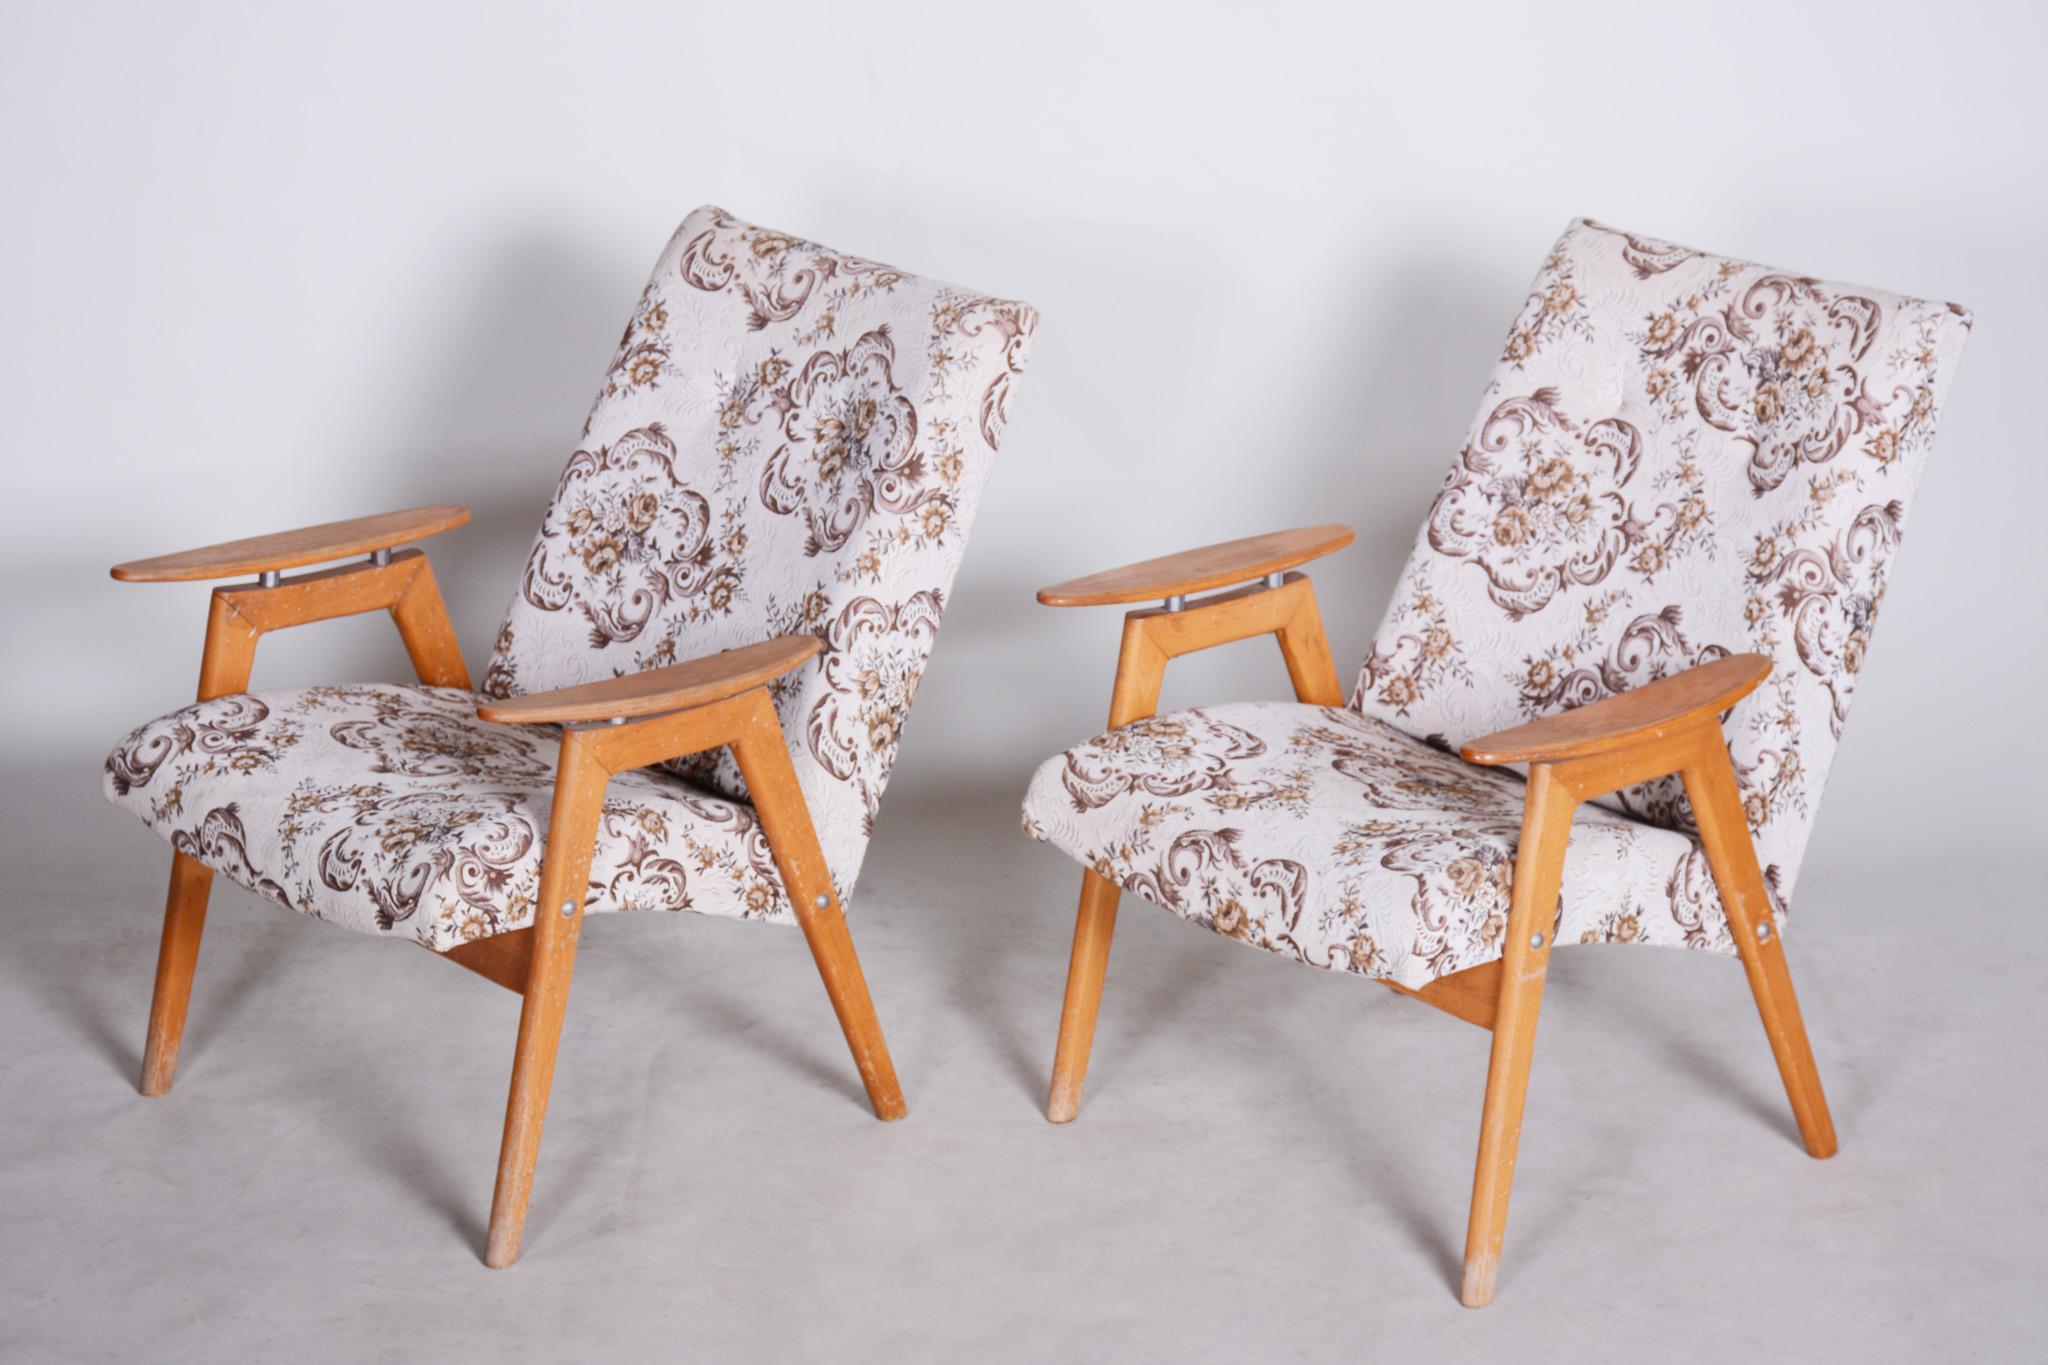 20th Century Pair of Beige Midcentury Armchairs, Made in Czechia, 1950s, Original Condition For Sale